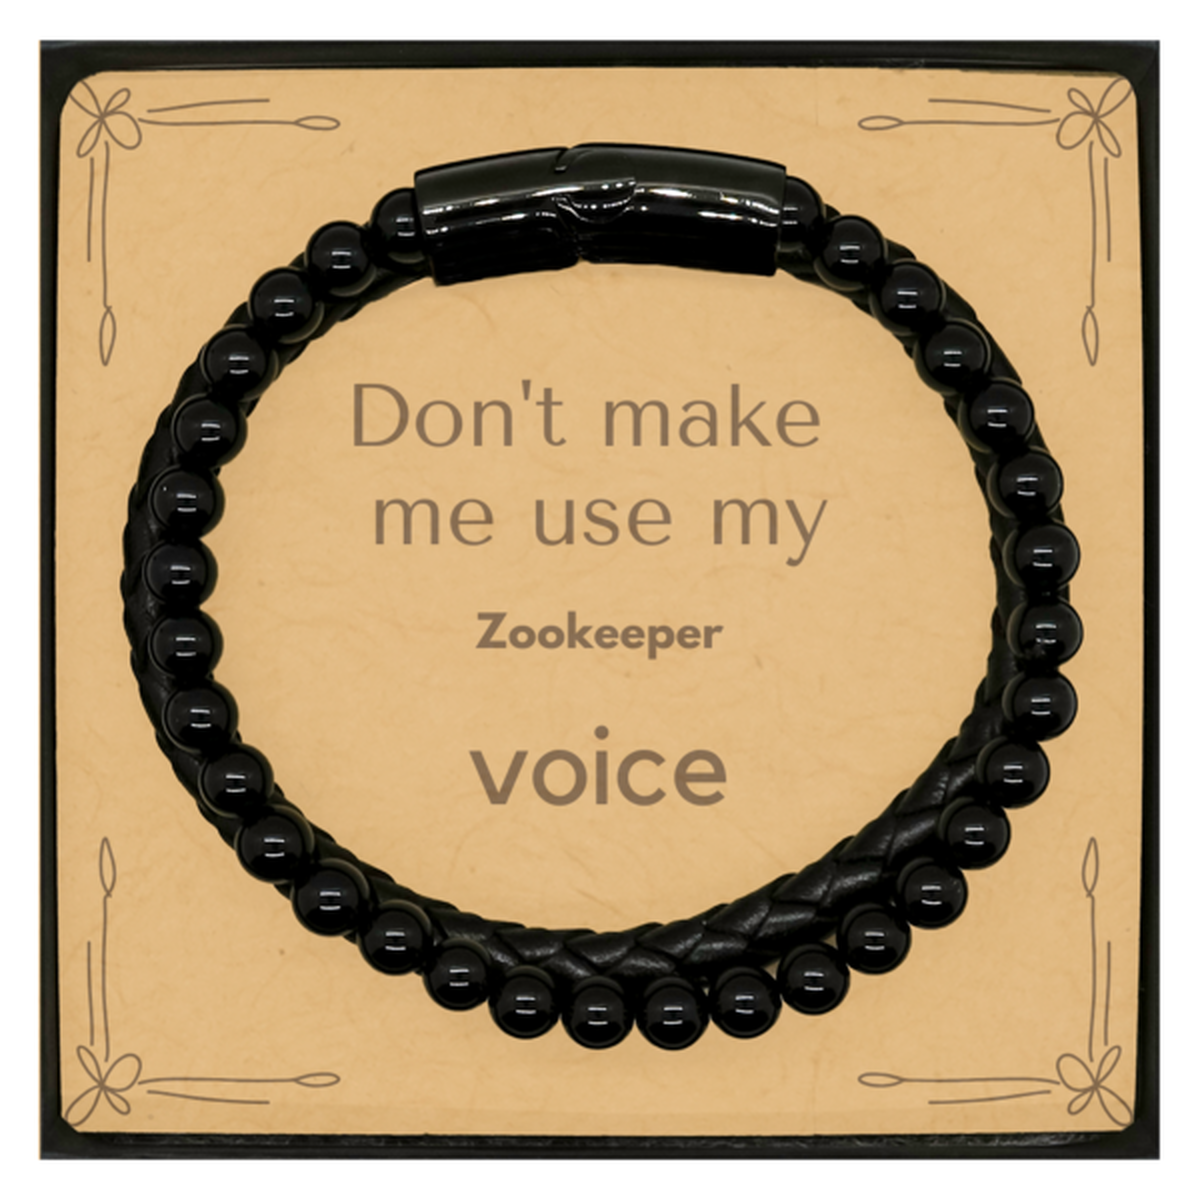 Don't make me use my Zookeeper voice, Sarcasm Zookeeper Card Gifts, Christmas Zookeeper Stone Leather Bracelets Birthday Unique Gifts For Zookeeper Coworkers, Men, Women, Colleague, Friends